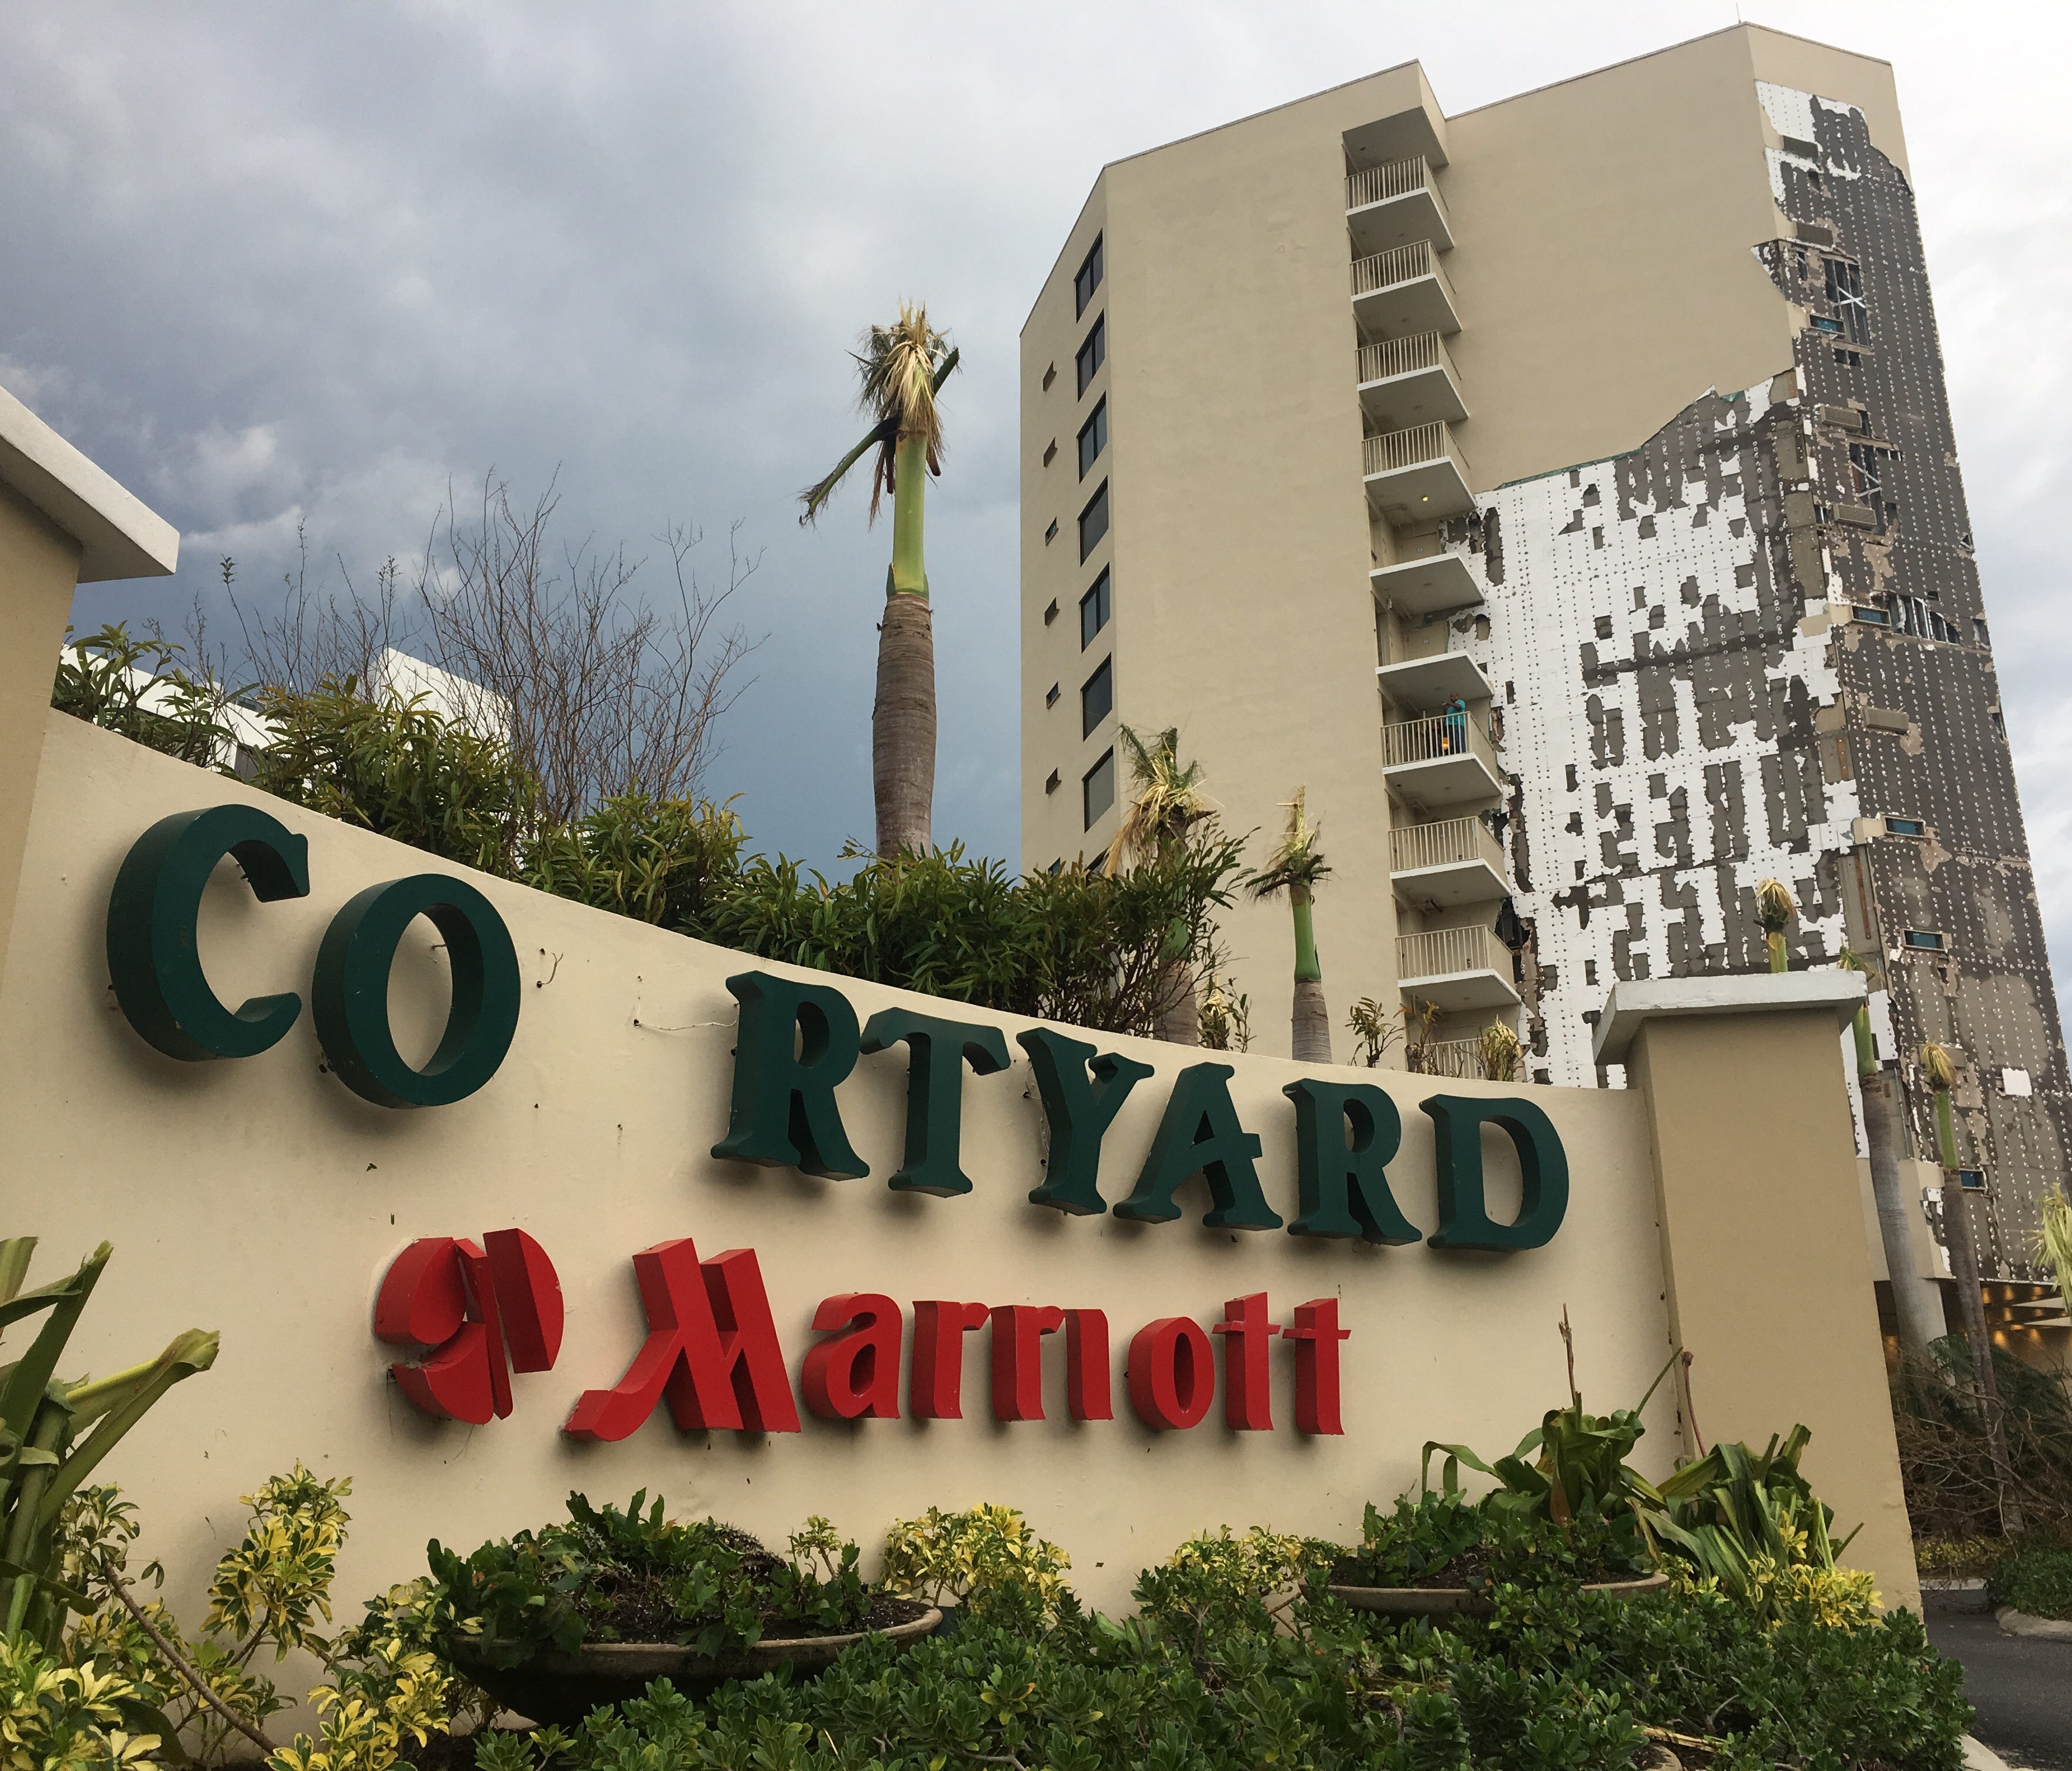 The Courtyard Marriott Isla Verde in San Juan lost a wall and had other structural damage from Hurricane Maria but mostly withstood the storm's barrage.